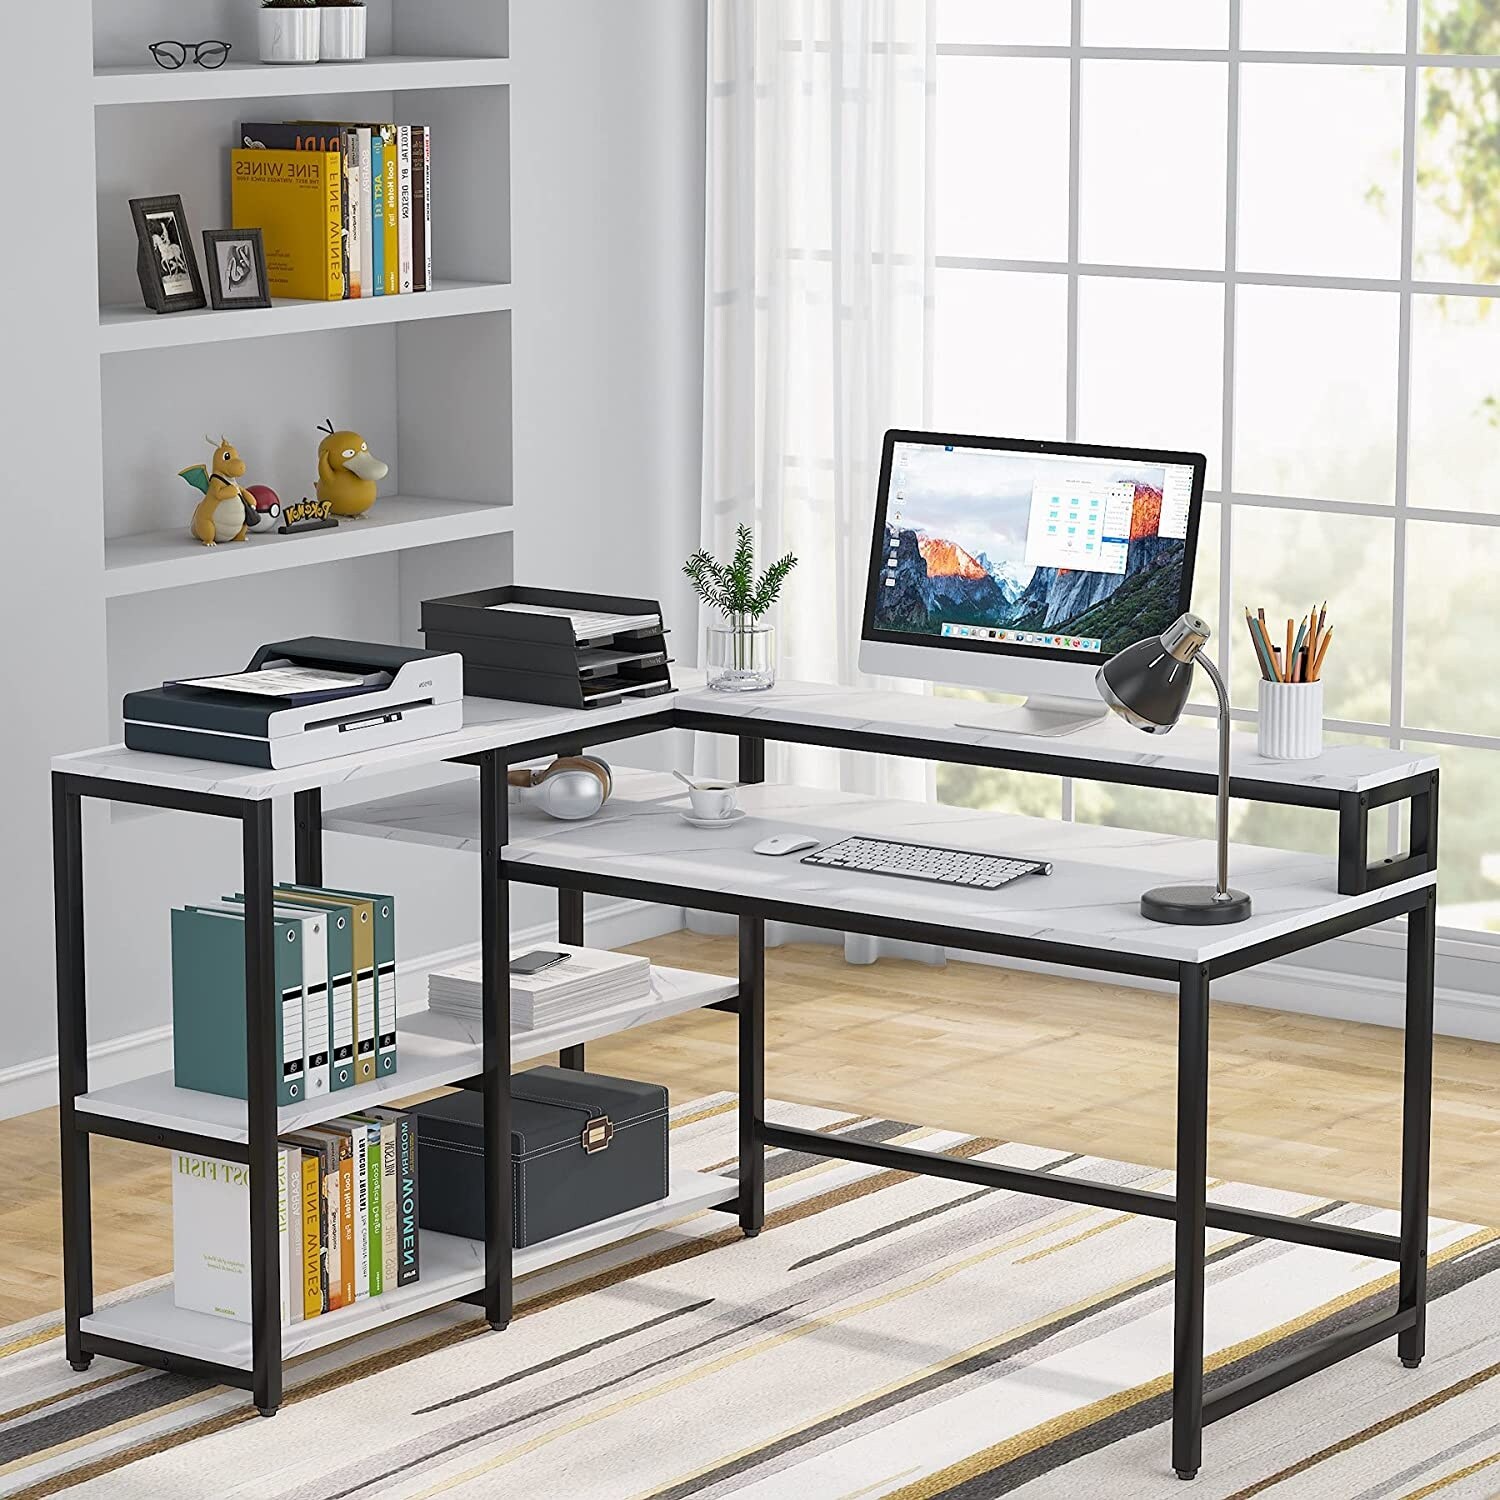 https://ak1.ostkcdn.com/images/products/is/images/direct/4a205061ae8c2f6cc8266cf67d9ced8fa81e1d53/55-Inch-Reversible-L-Shaped-Desk-with-Storage-Shelf%2C-Corner-Desk-for-Home-Office.jpg